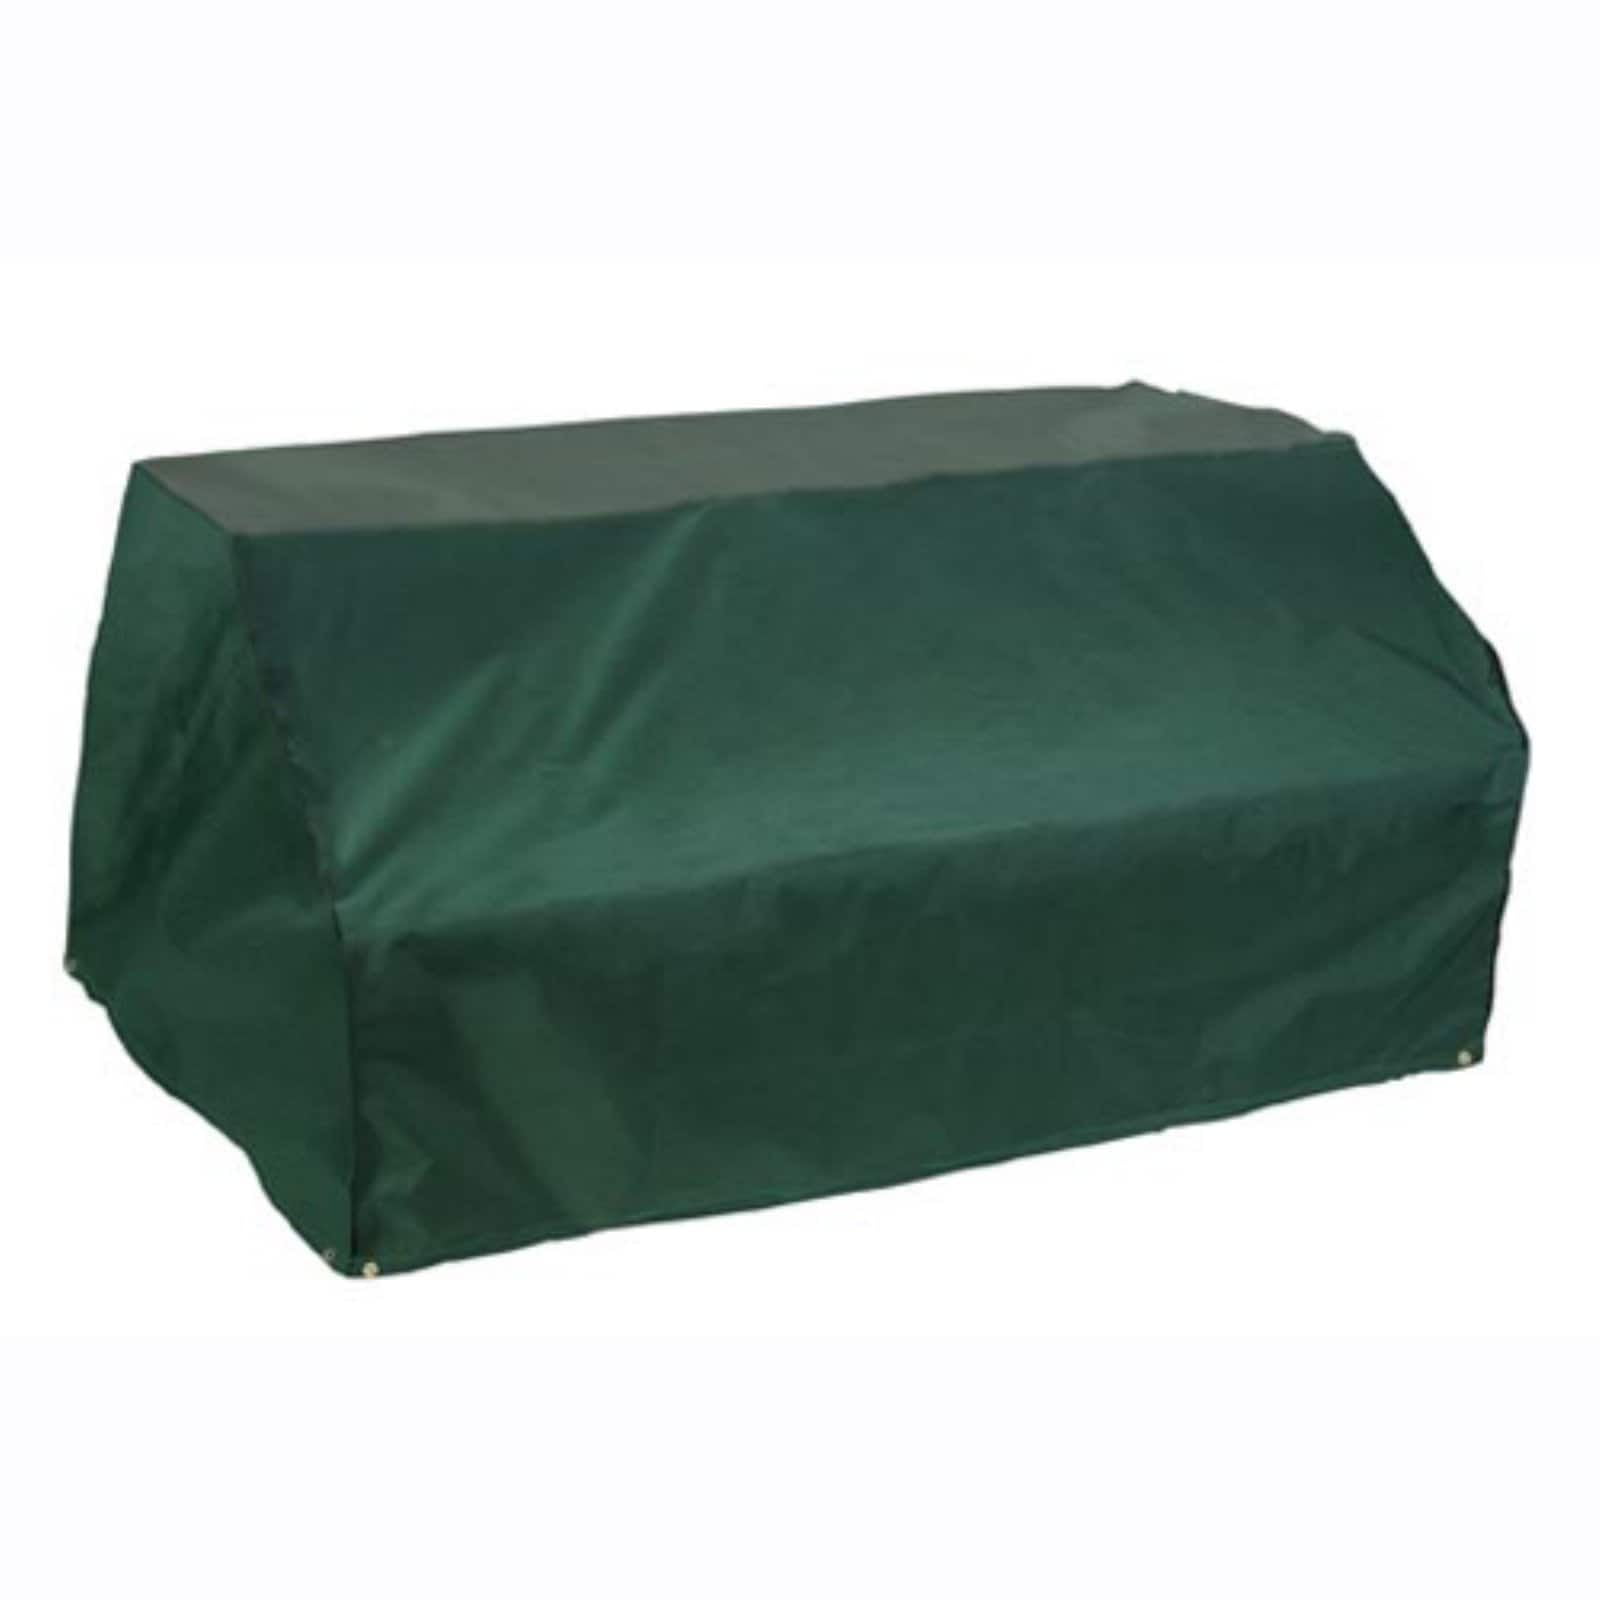 8 Seat Bosmere C560 Rectangular Table Cover 